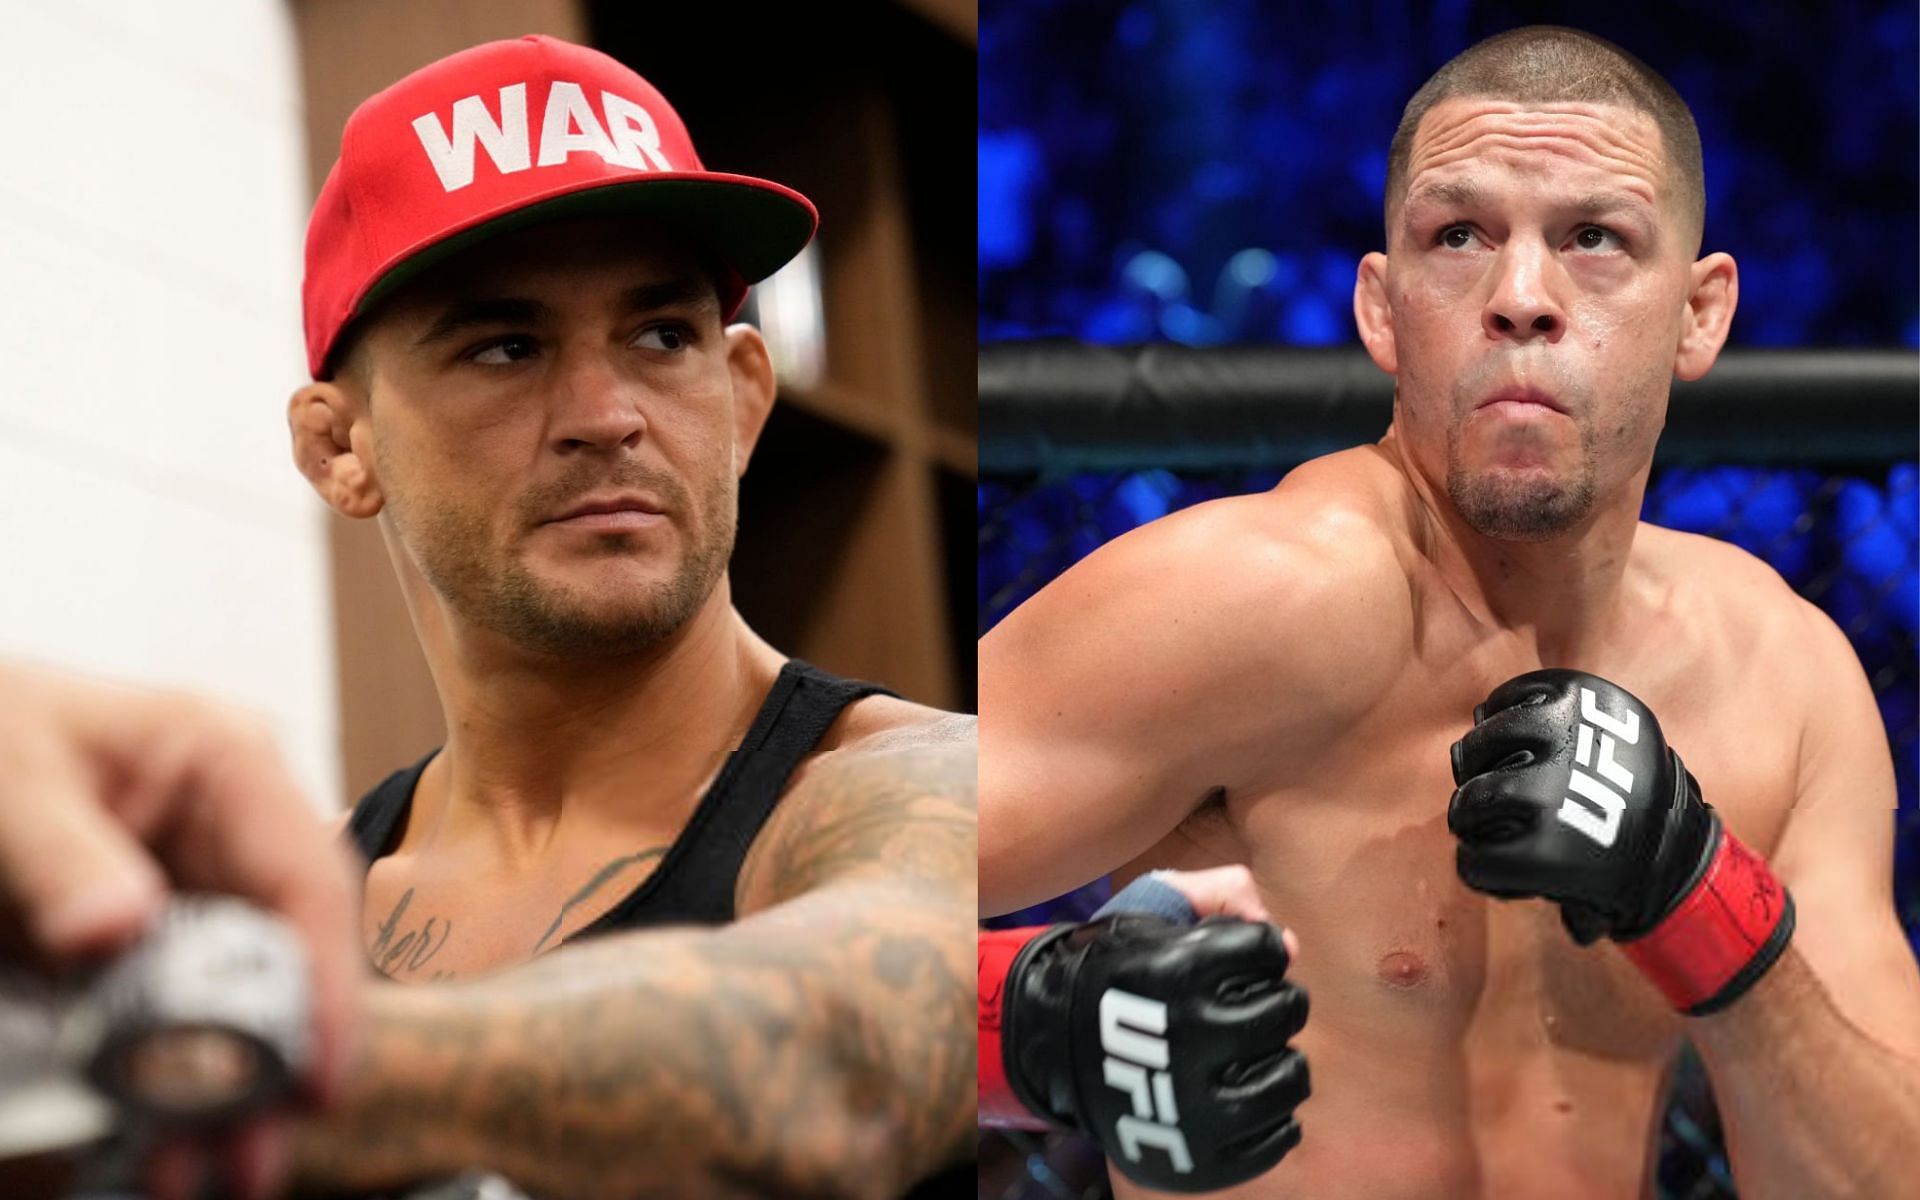 Dustin Poirier says he will face Nate Diaz in the UFC on one condition